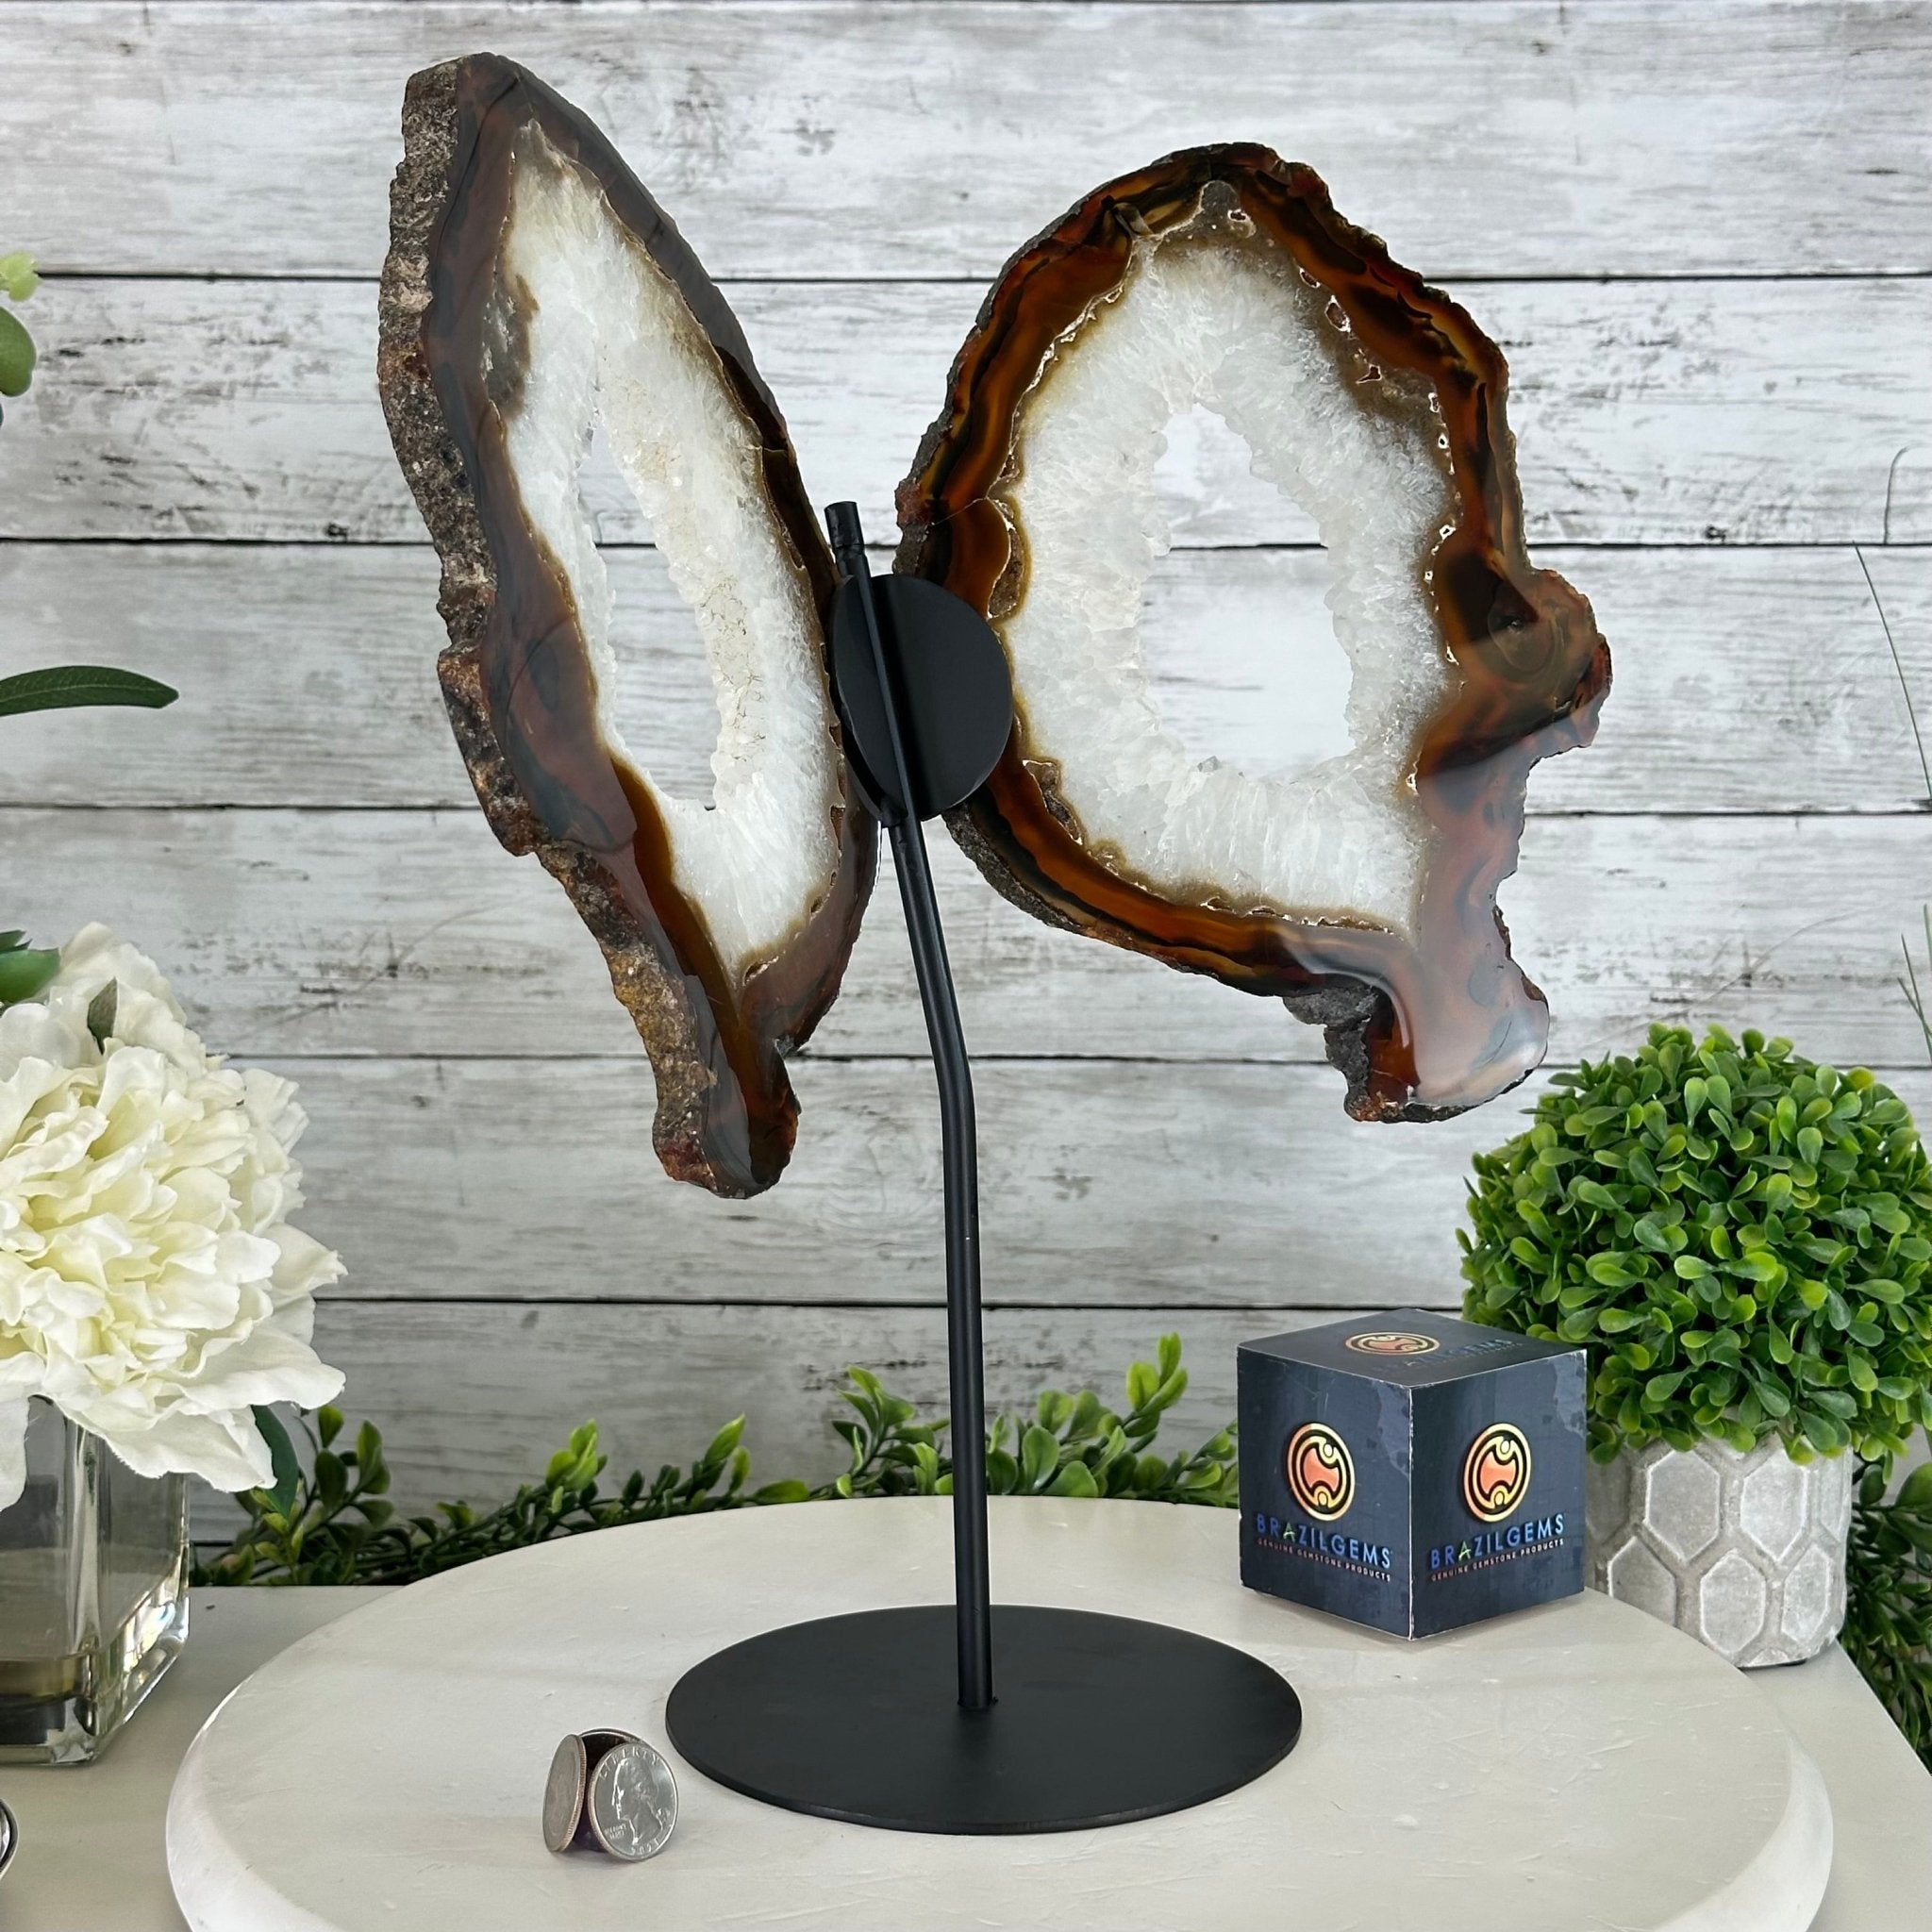 Natural Brazilian Agate "Butterfly Wings", 15" Tall #5050NA-087 - Brazil GemsBrazil GemsNatural Brazilian Agate "Butterfly Wings", 15" Tall #5050NA-087Agate Butterfly Wings5050NA-087